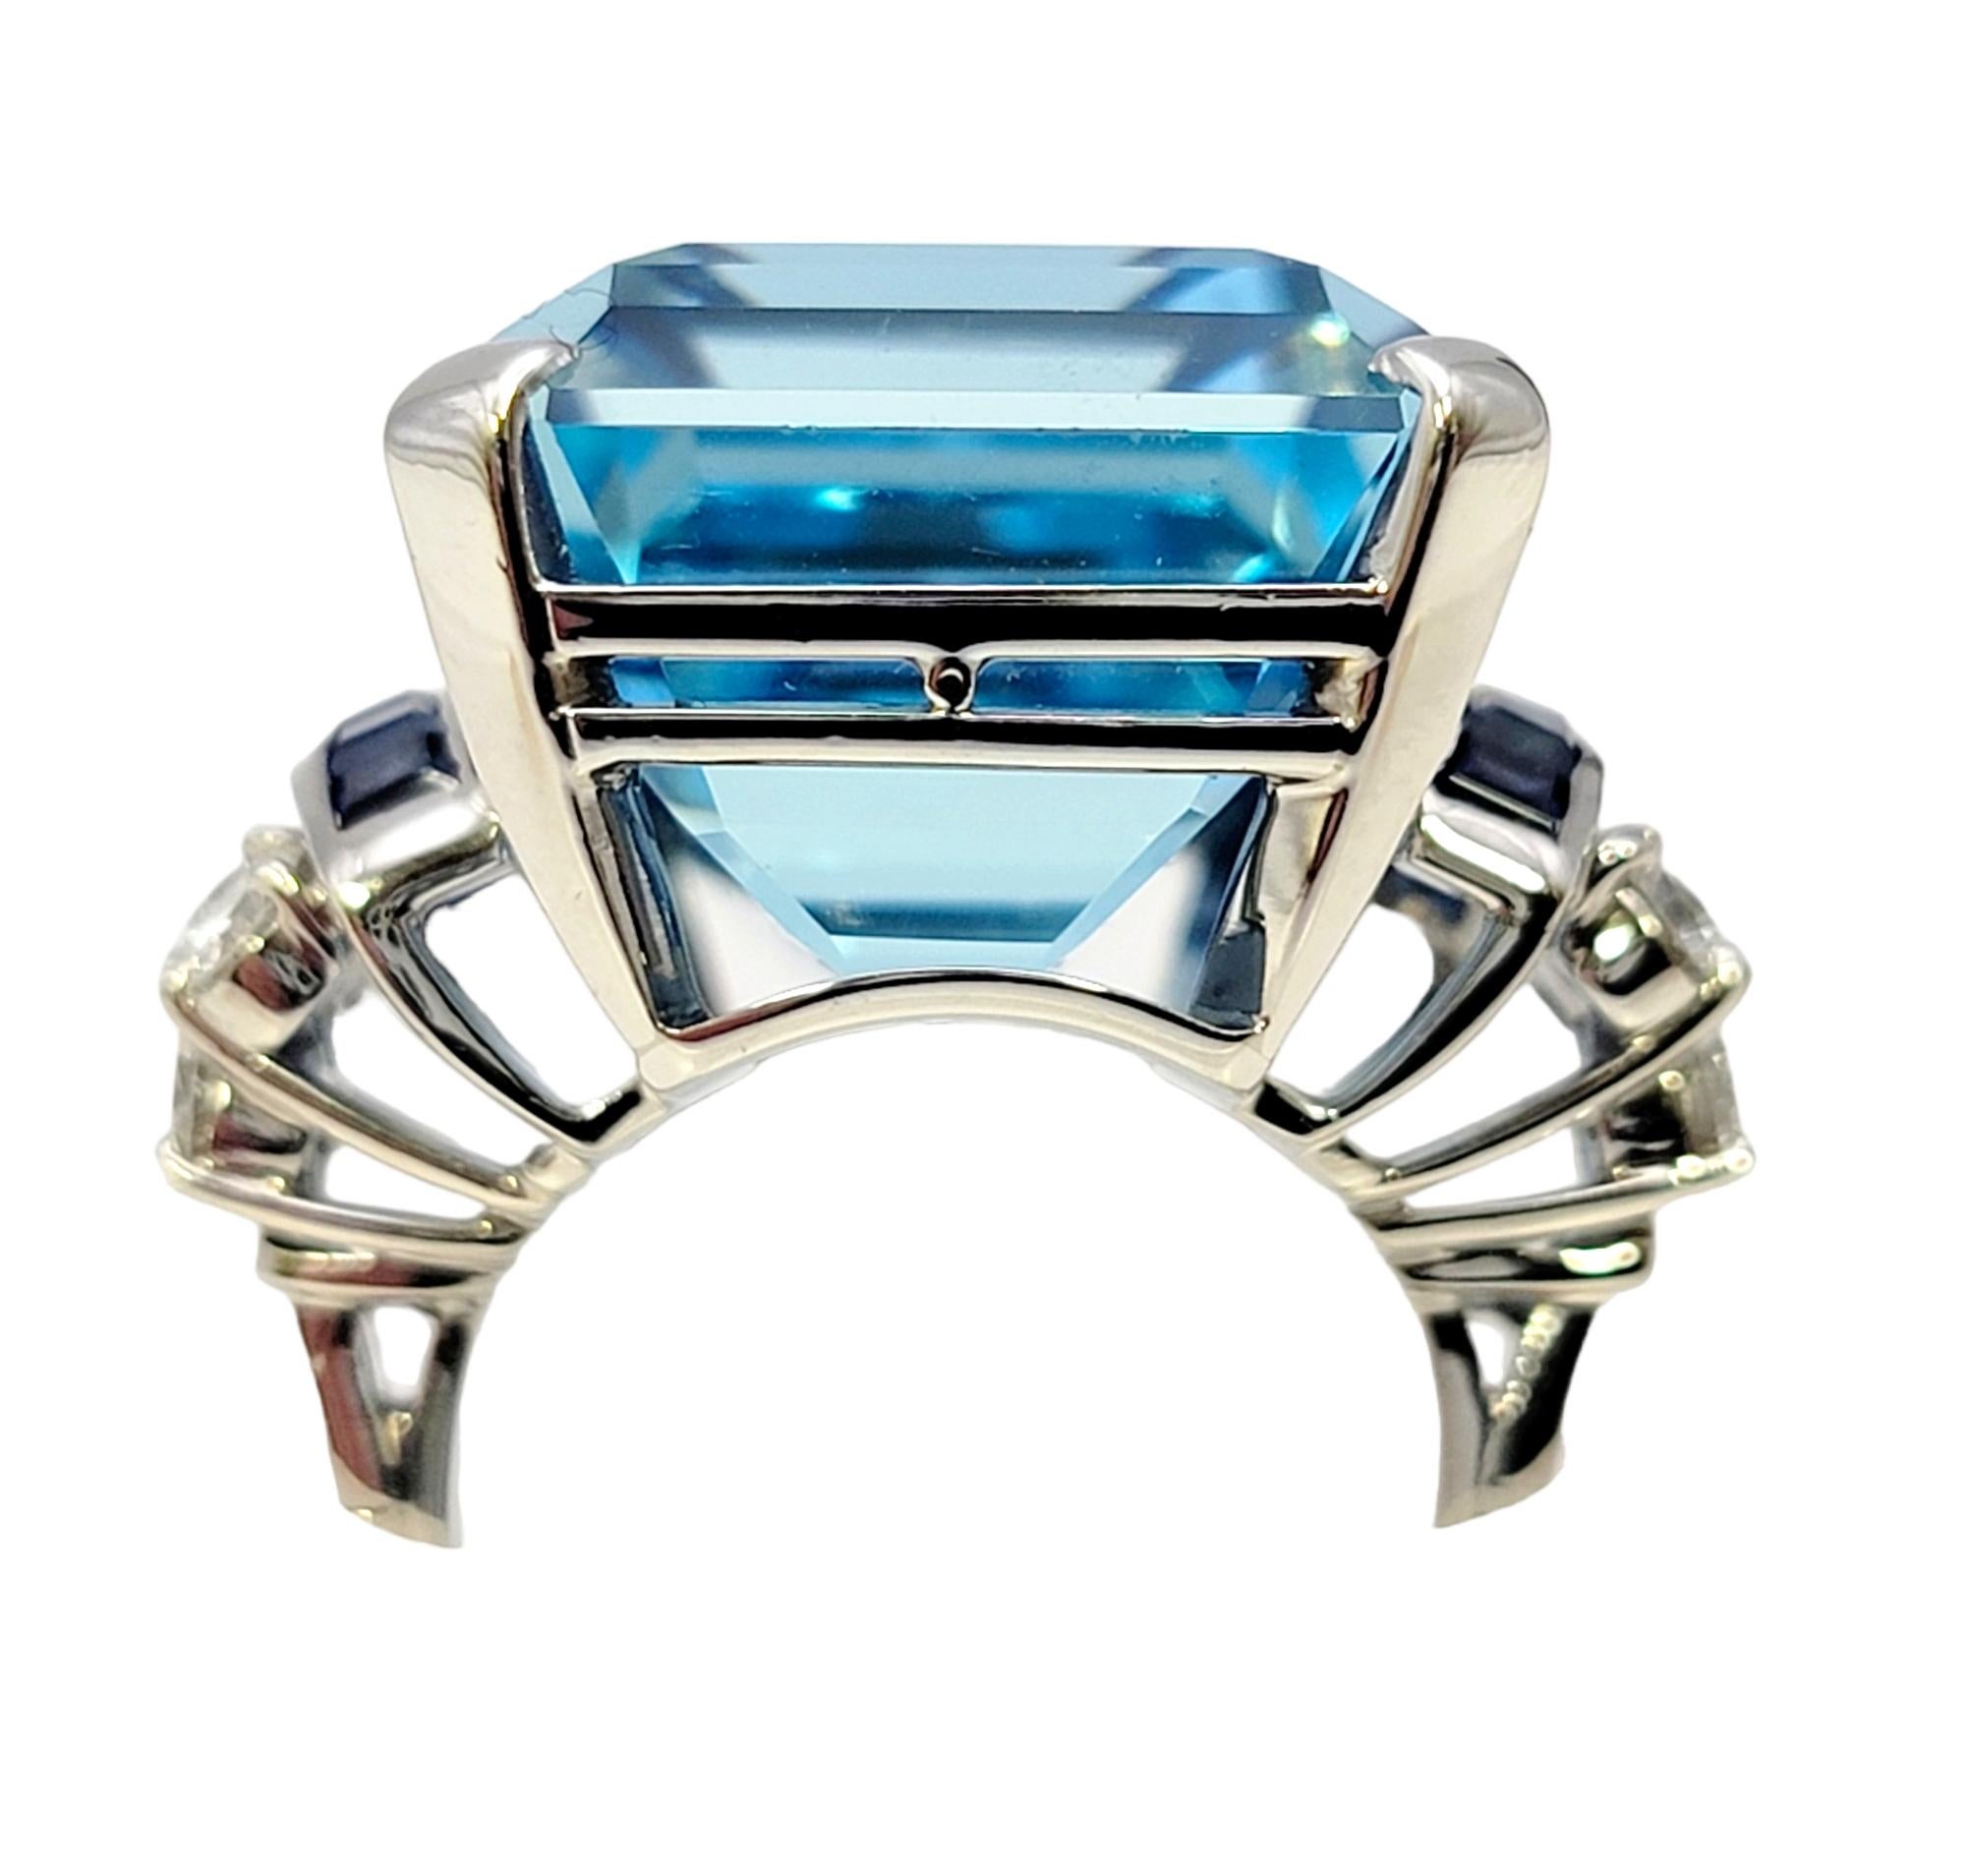 Huge Emerald Cut Aquamarine Ring with Sapphire and Diamond Accents in Platinum In Good Condition For Sale In Scottsdale, AZ